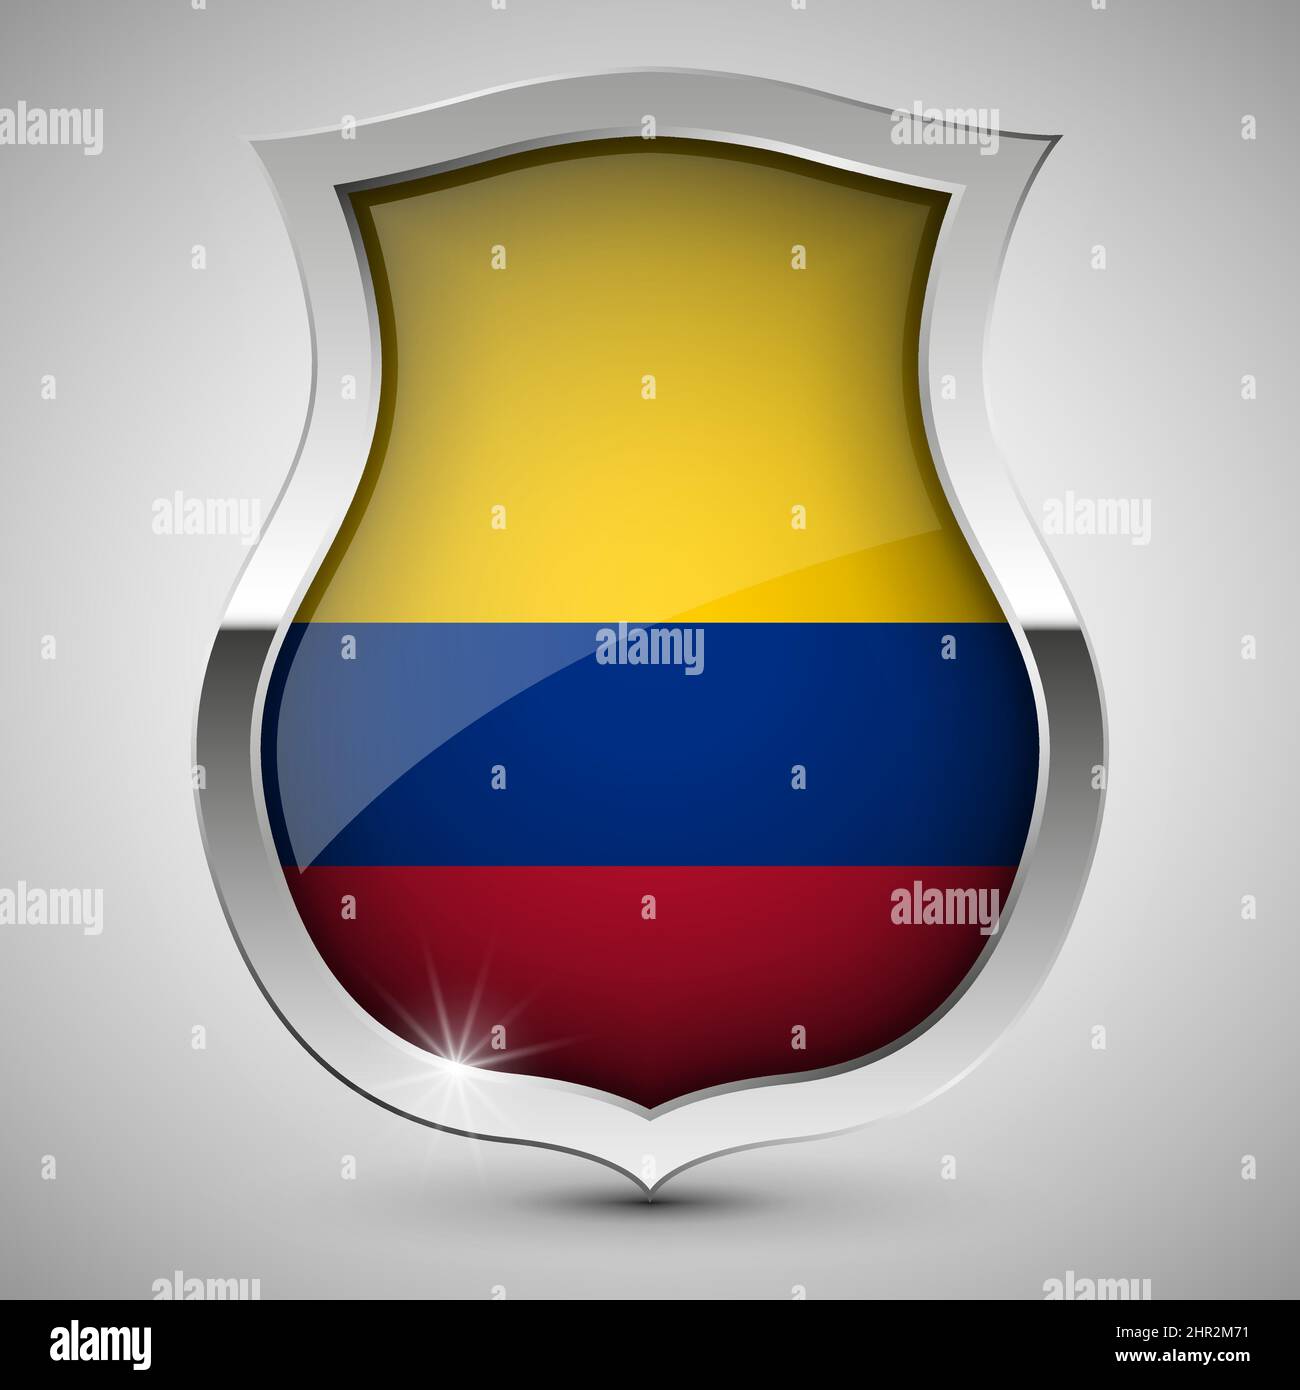 Soccer Team Badge Blue and Yellow Color Stock Vector - Illustration of  banner, label: 132875930